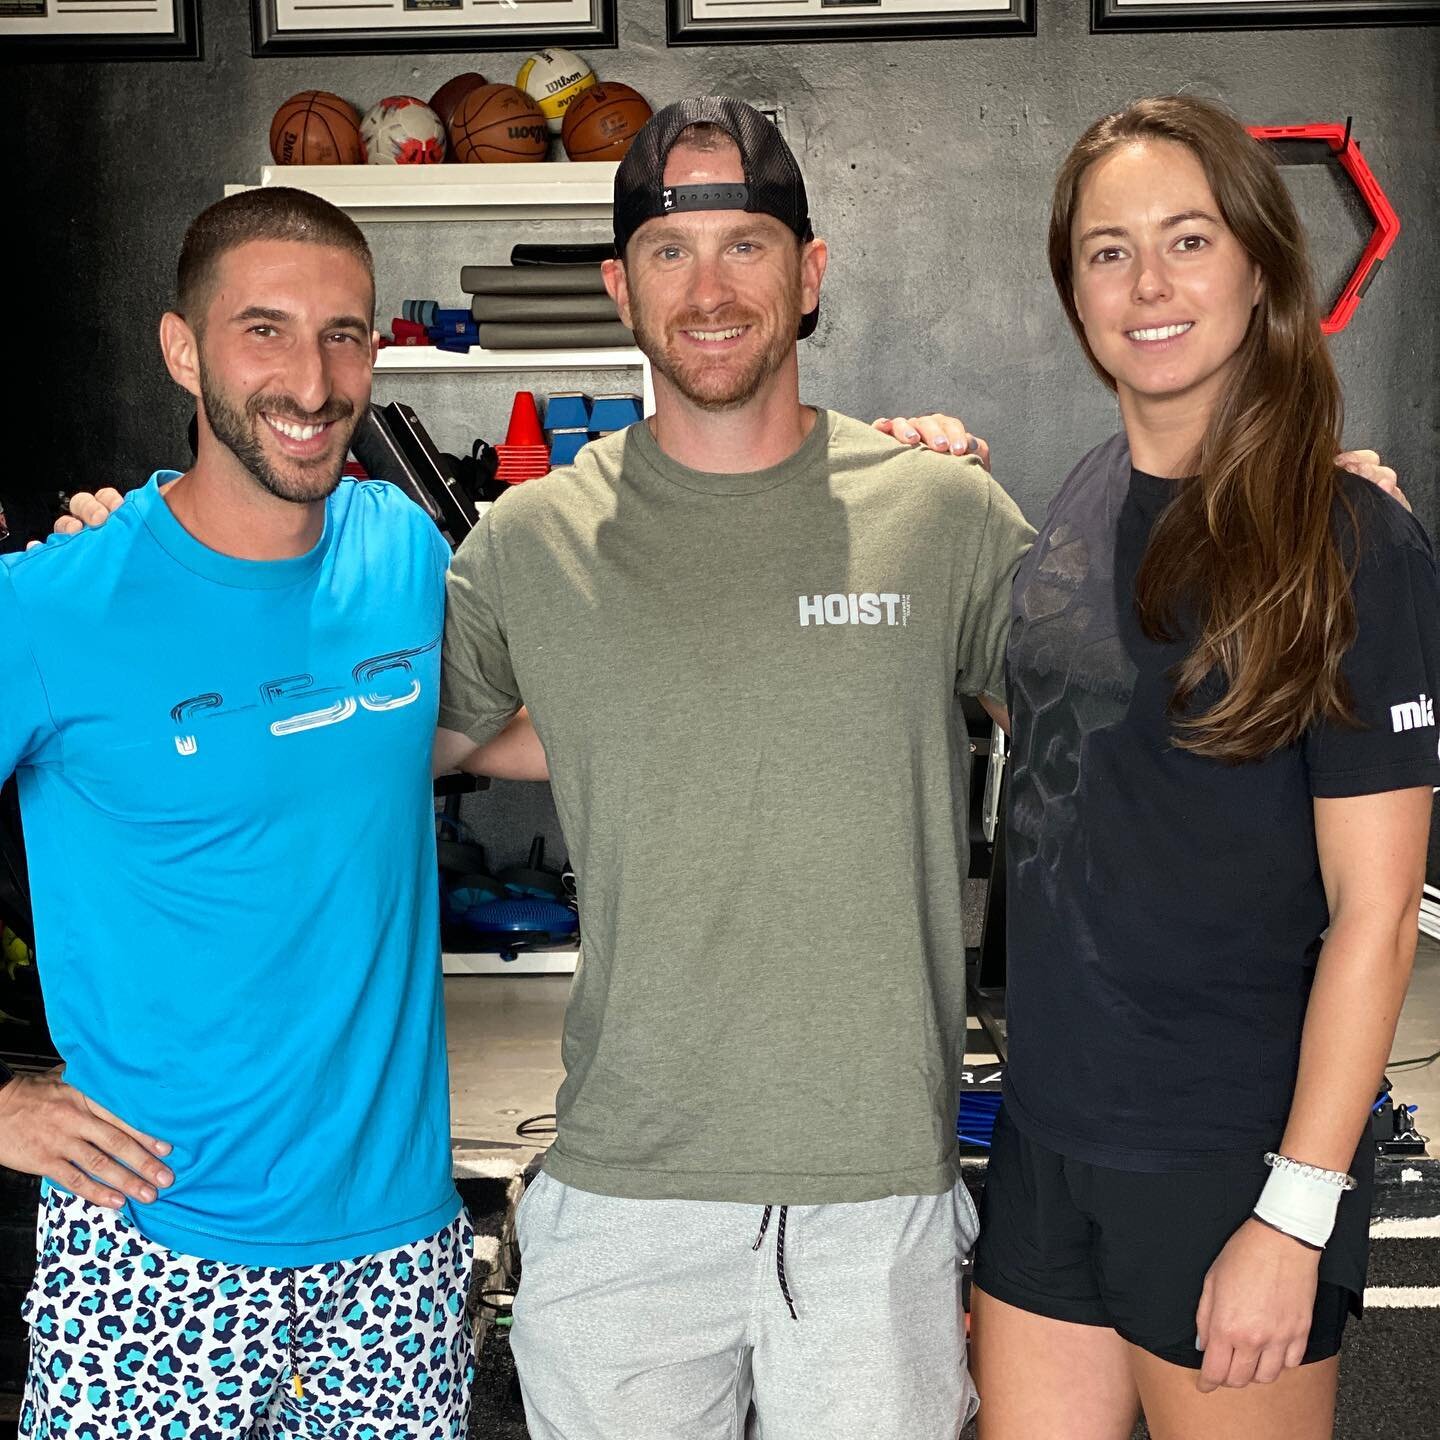 @coachholla enjoyed a visit with @jcollinsperformance and @elise_fittt at @dbcfit in Miami today to discuss all things speed and @1080motion - love learning from and sharing knowledge with other practitioners! Plus, they are another @universalspeedra